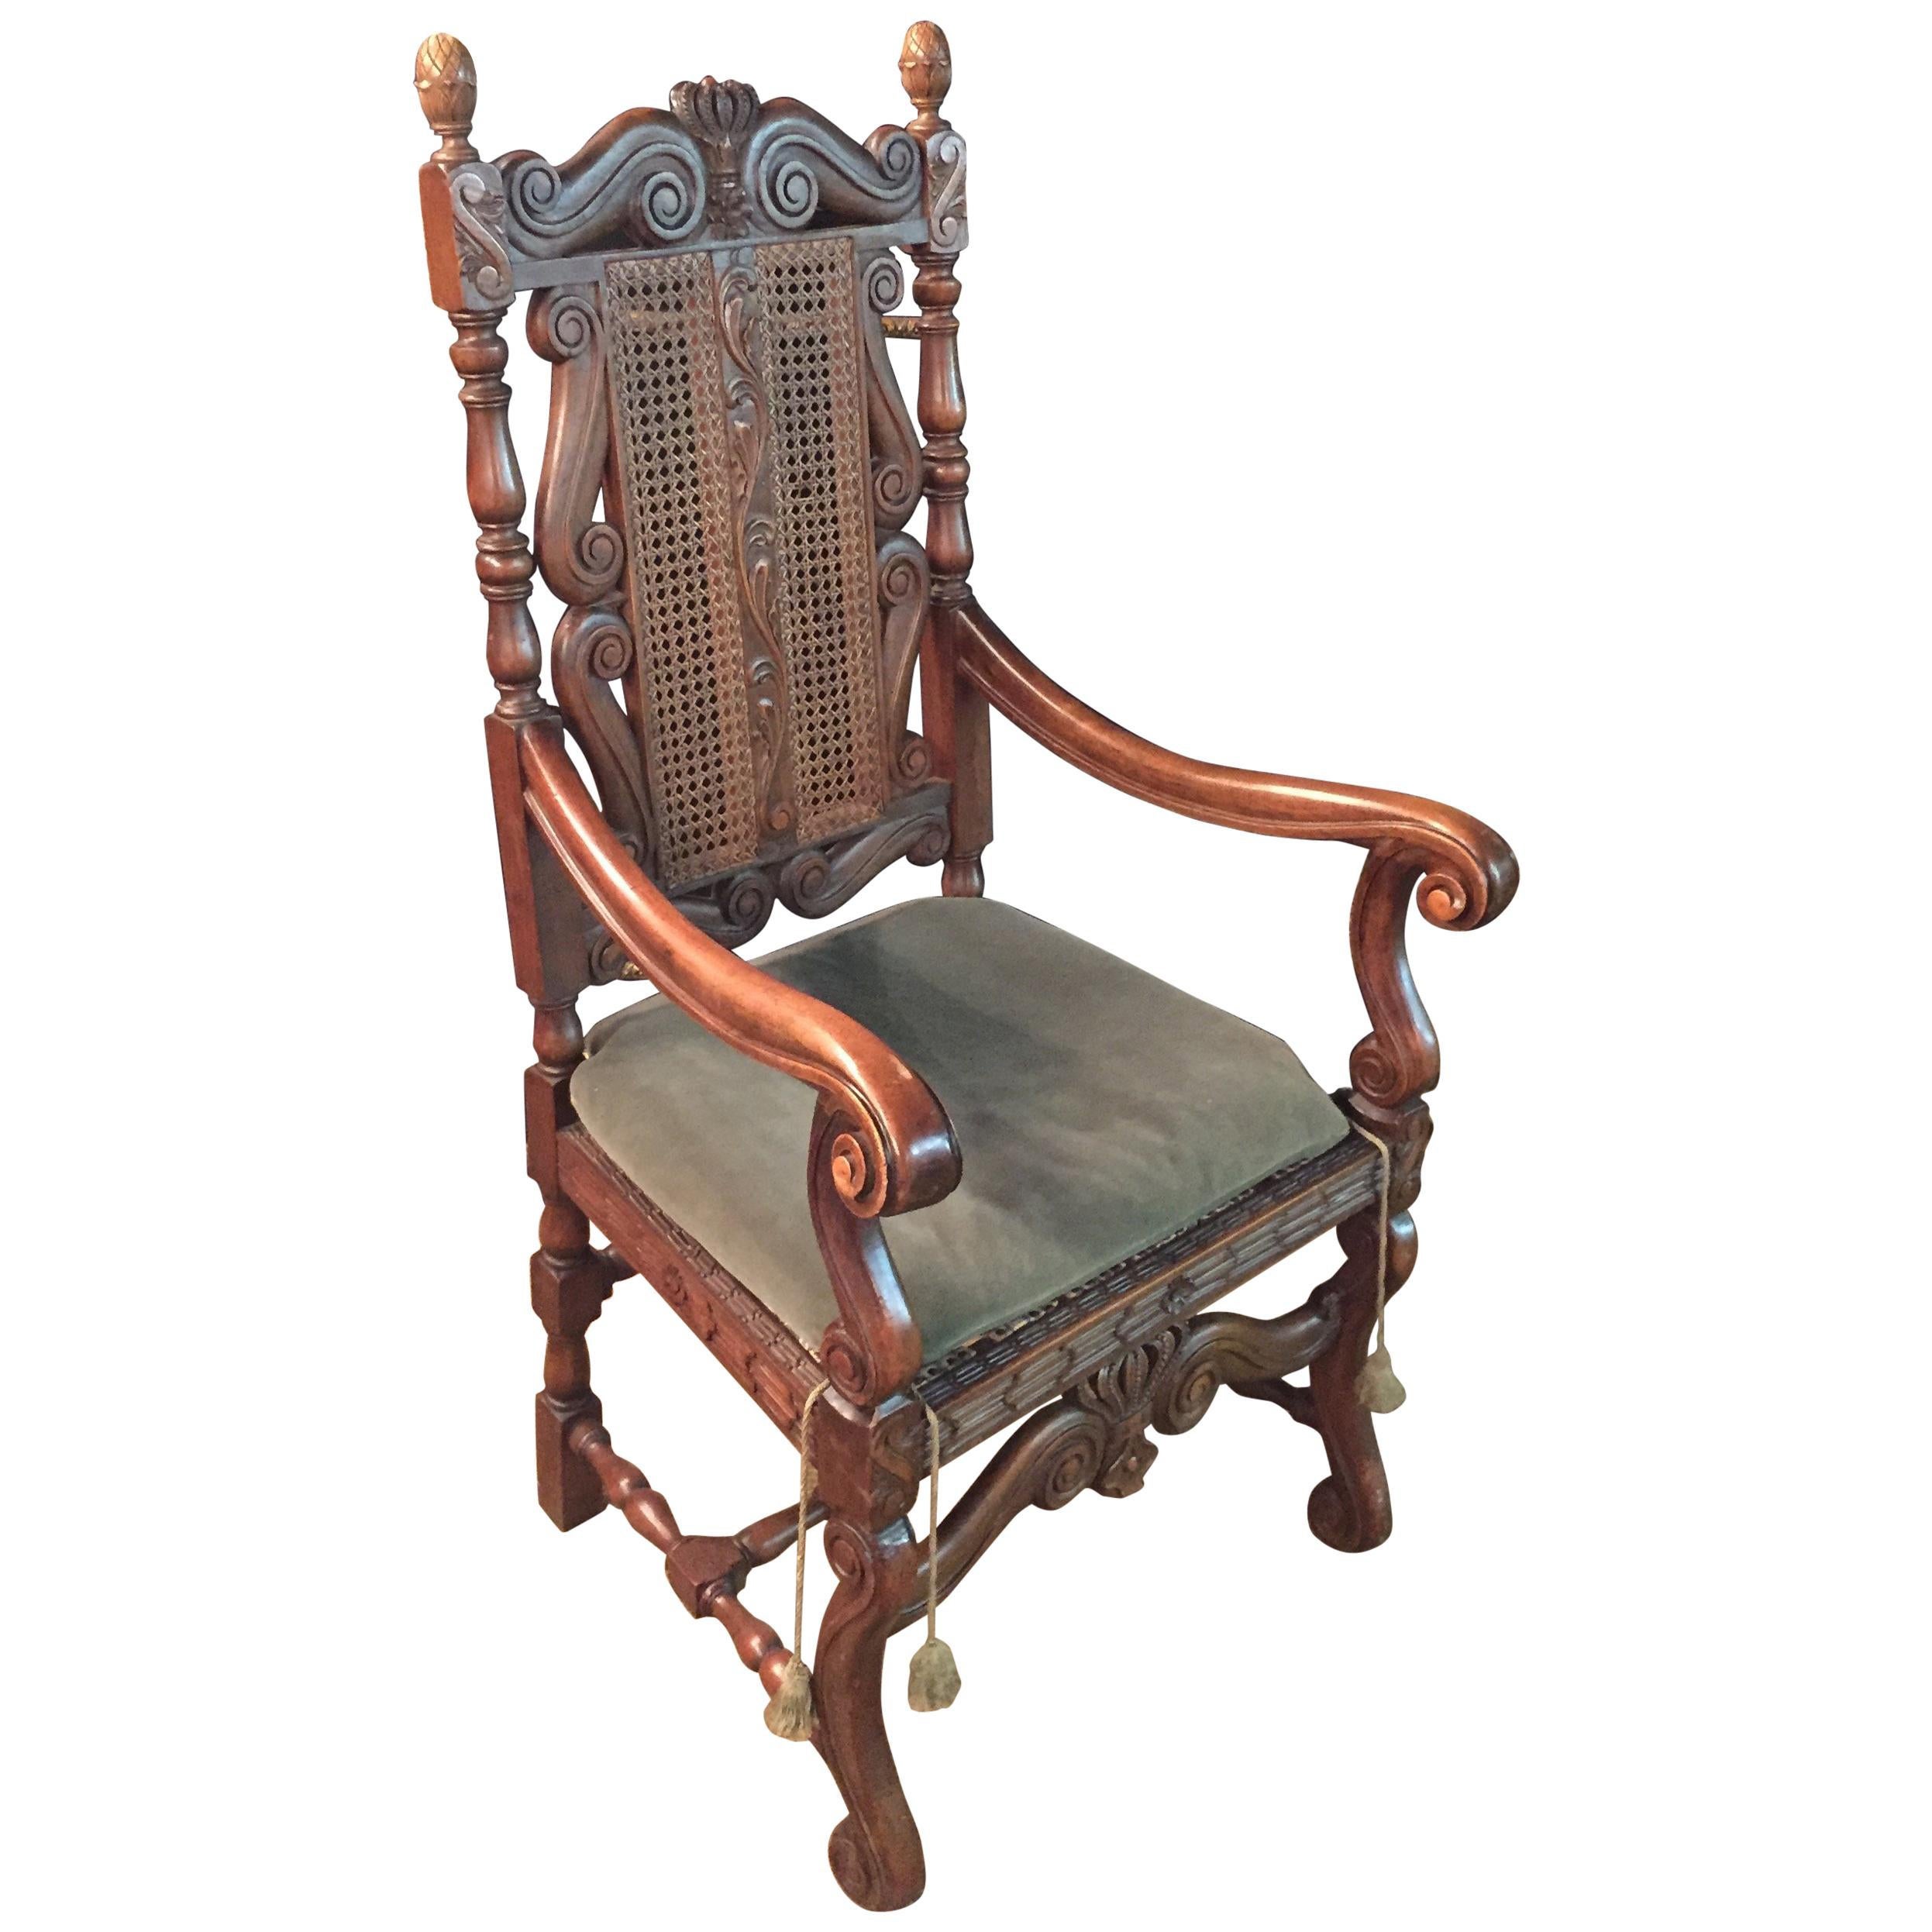 Antique Baroque Throne Armchair Fully Carved with Crown, circa 1880 Walnut